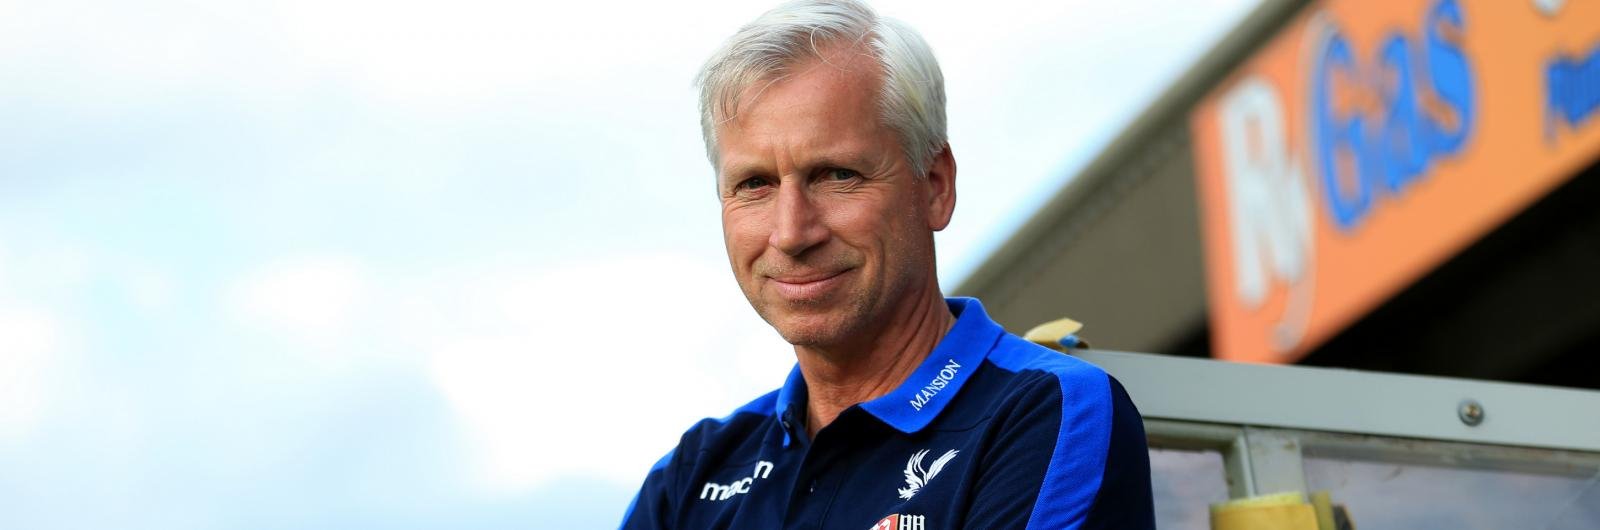 Crystal Palace vs West Bromwich Albion: Preview & Prediction